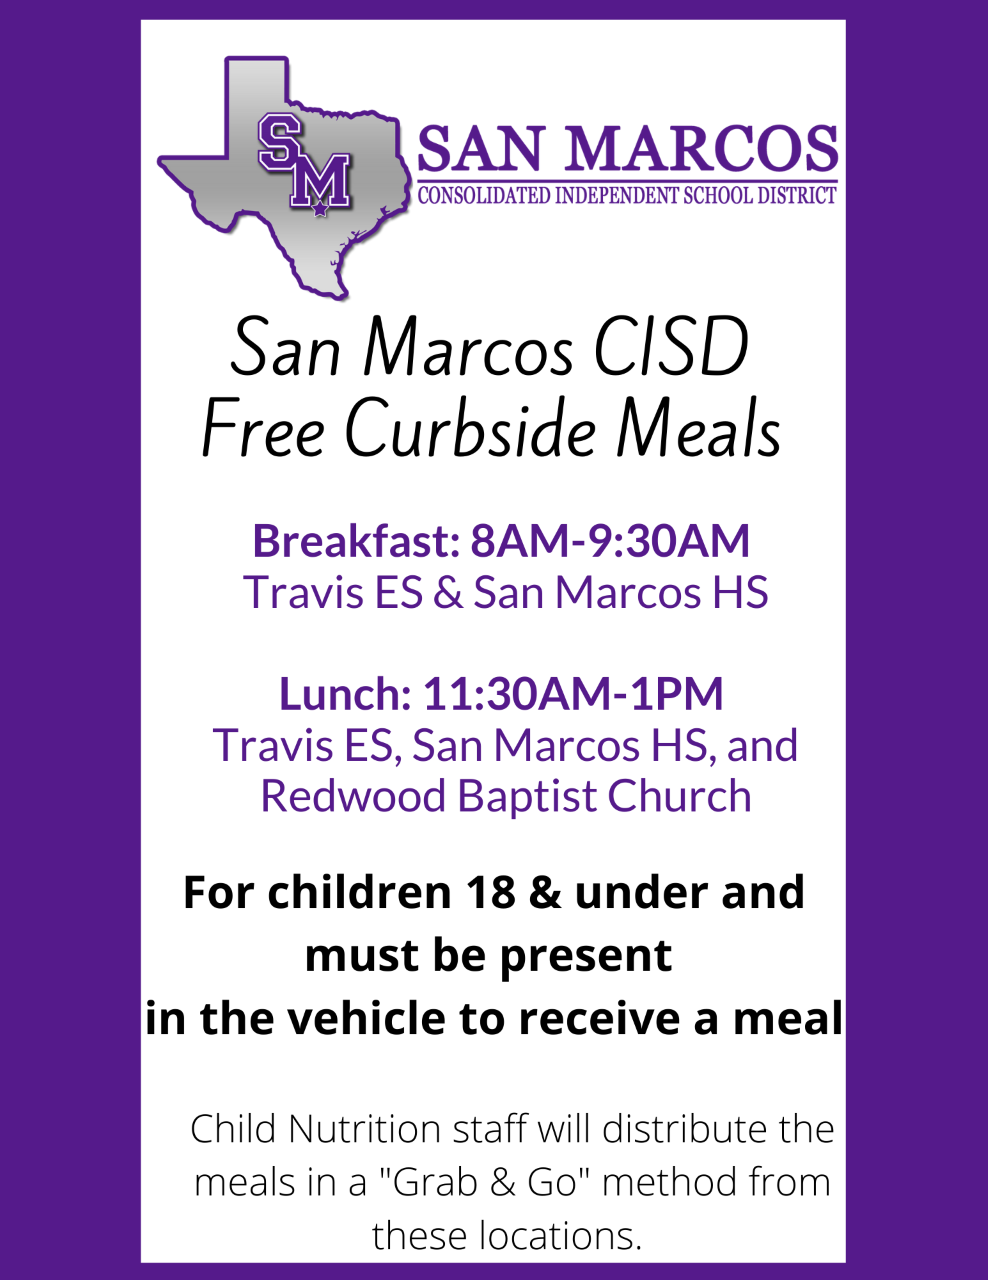 SMCISD+suspends+normal+school+operations+through+April+5%2C+meals+to+be+provided+during+distance+learning